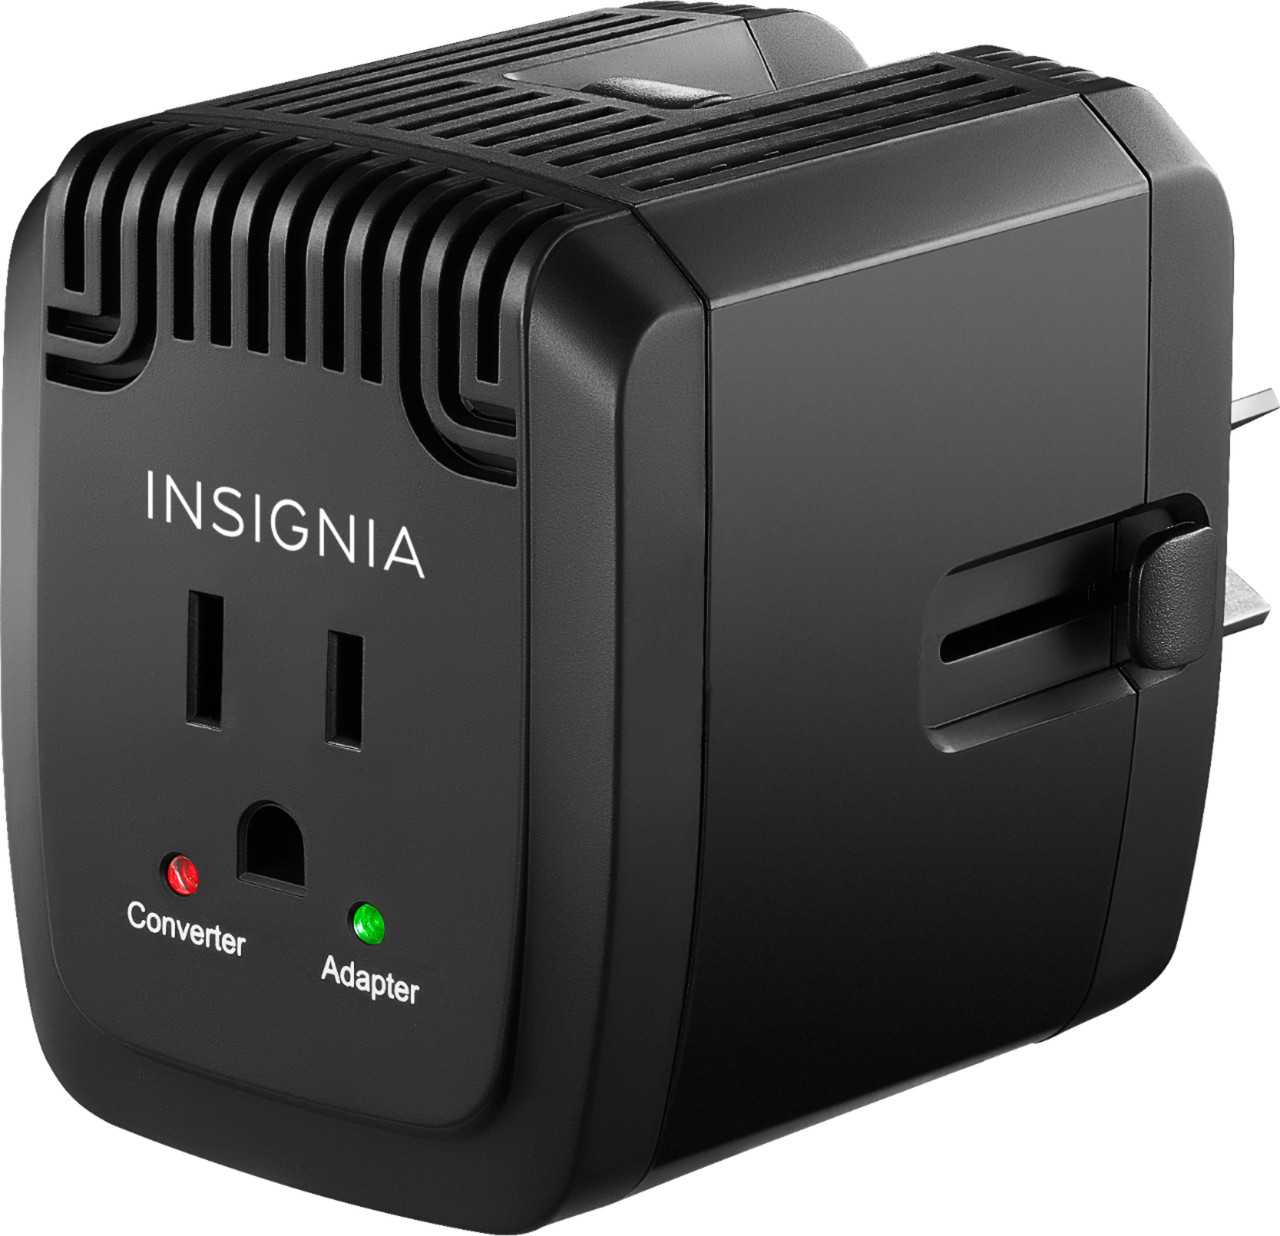 Insignia™ - All-in-One Travel Converter - Black